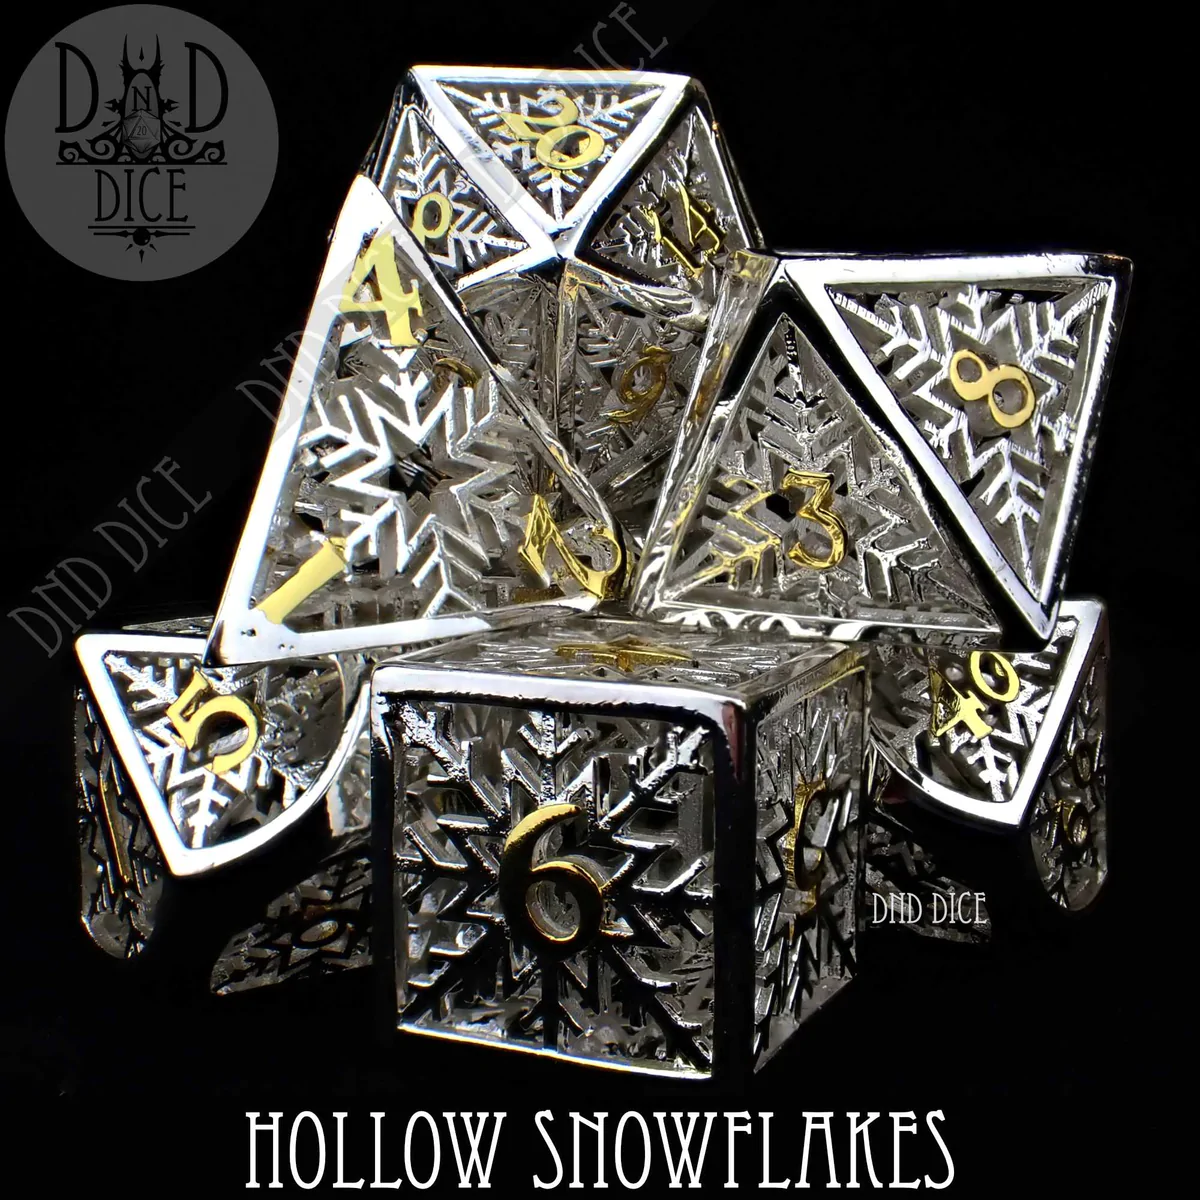 A photo of a set of six silver and gold Hollow Metal Dice with Snowflakes on the faces. The photo has two labels that read DND Dice and Hollow Snowflakes.